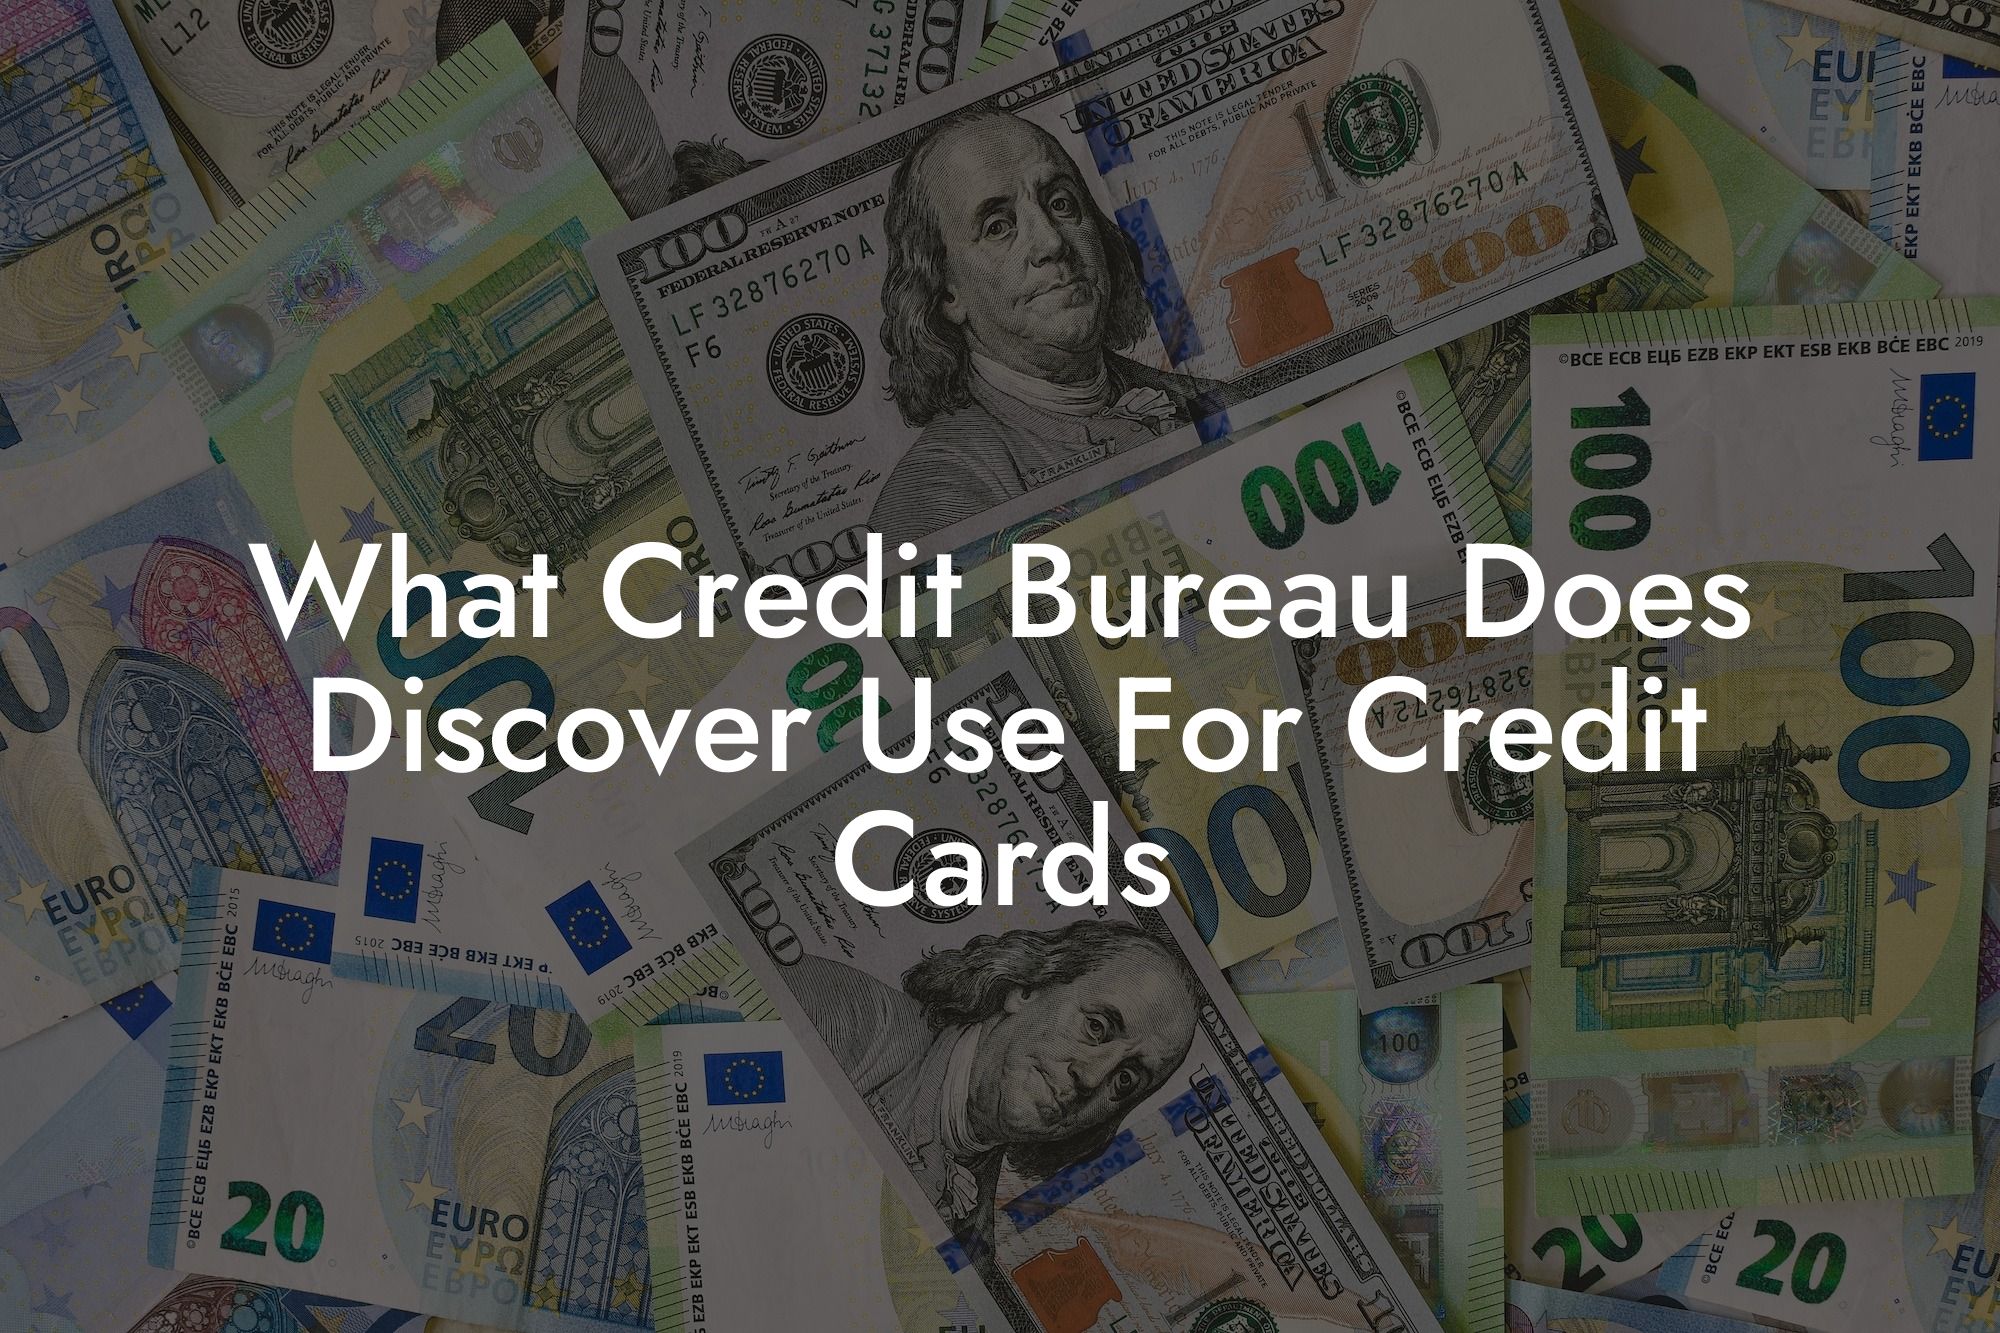 What Credit Bureau Does Discover Use For Credit Cards